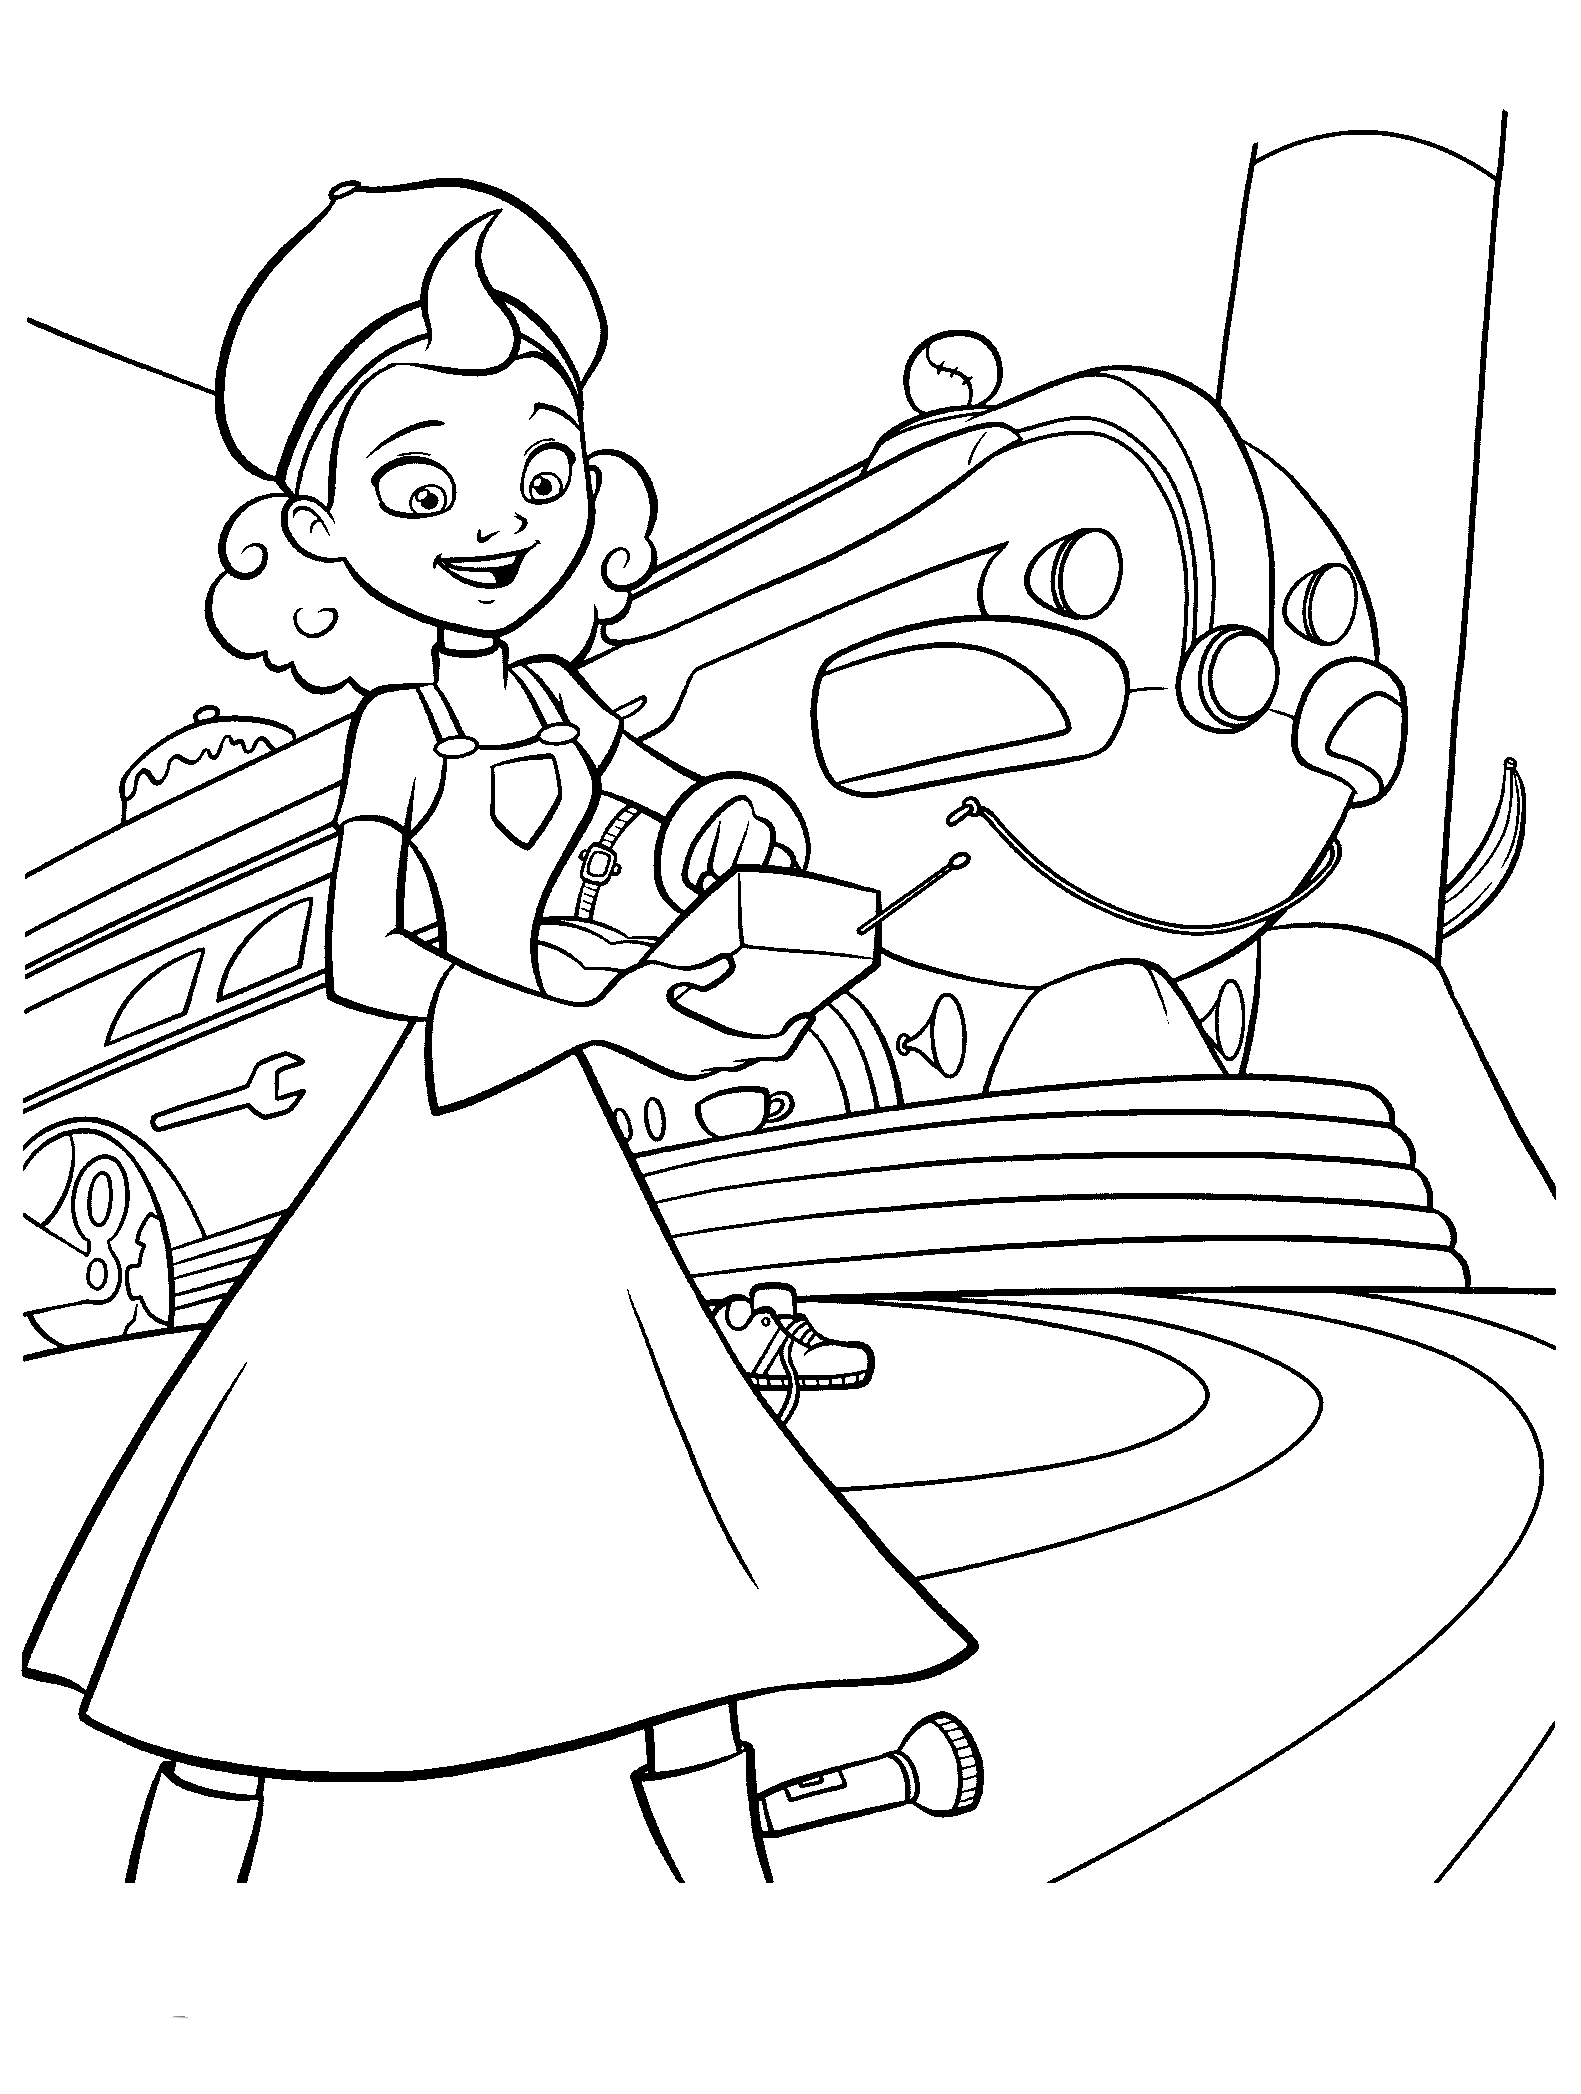 Coloring page - Lewiss locomotive